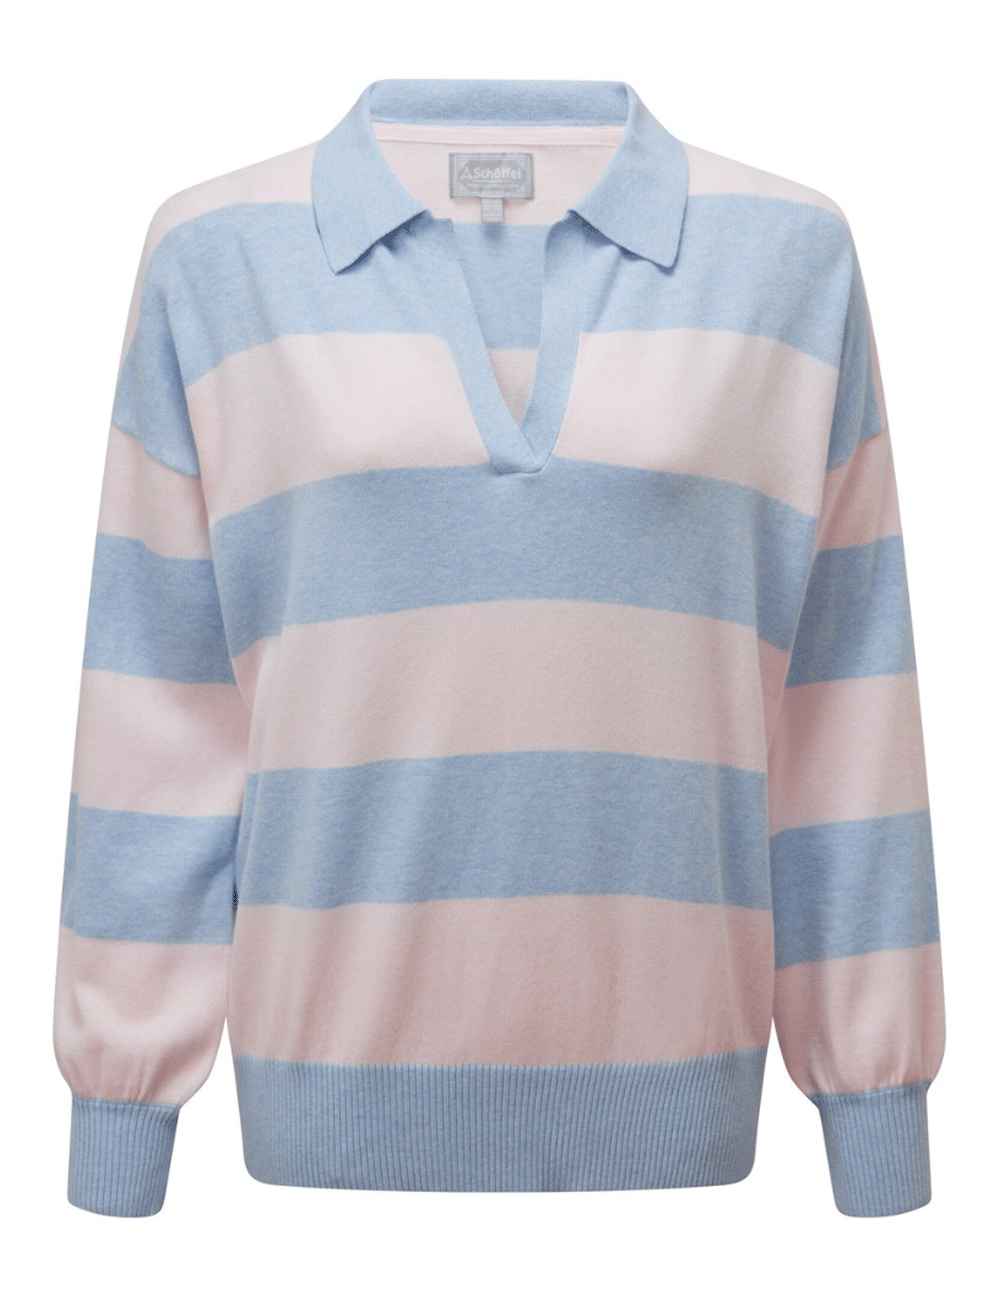 Schoffel's Roseland Jumper in Blush/Pale Blue on a white background